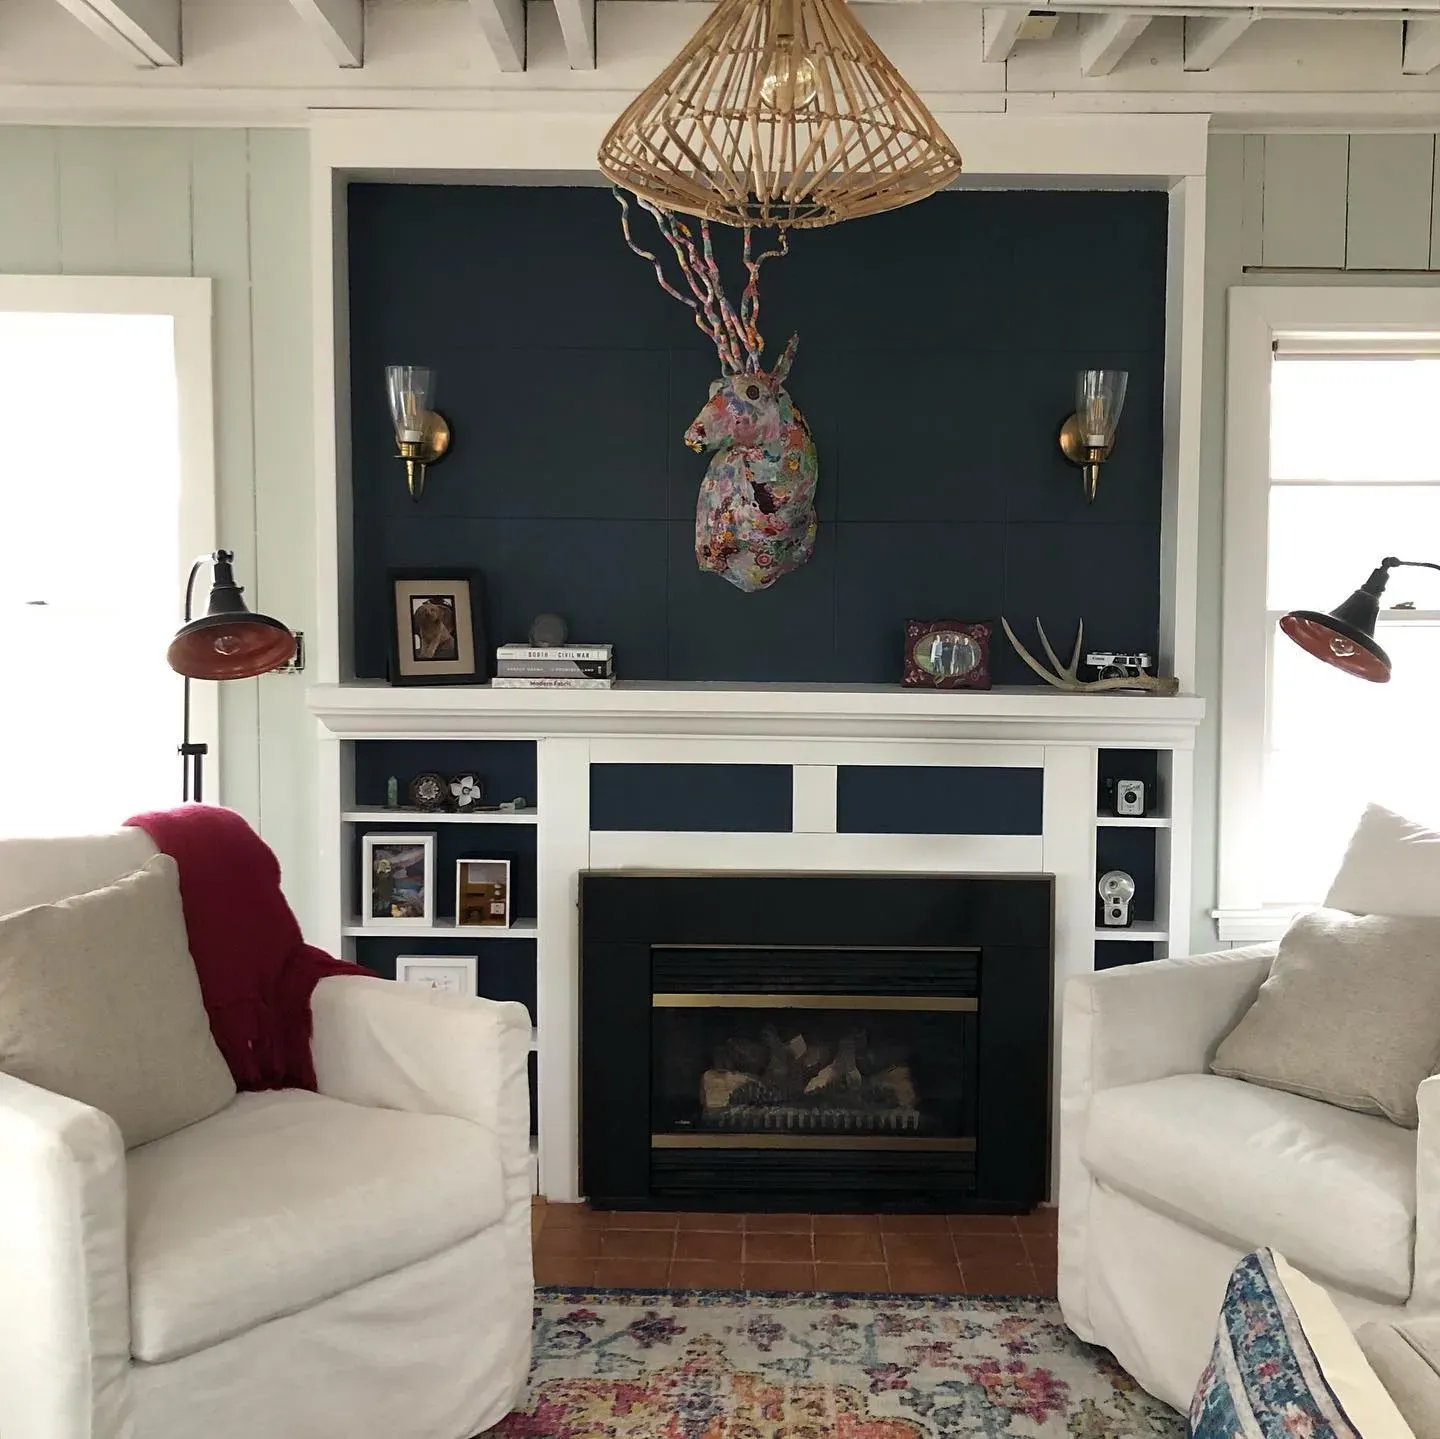 SW Sea Serpent living room fireplace color